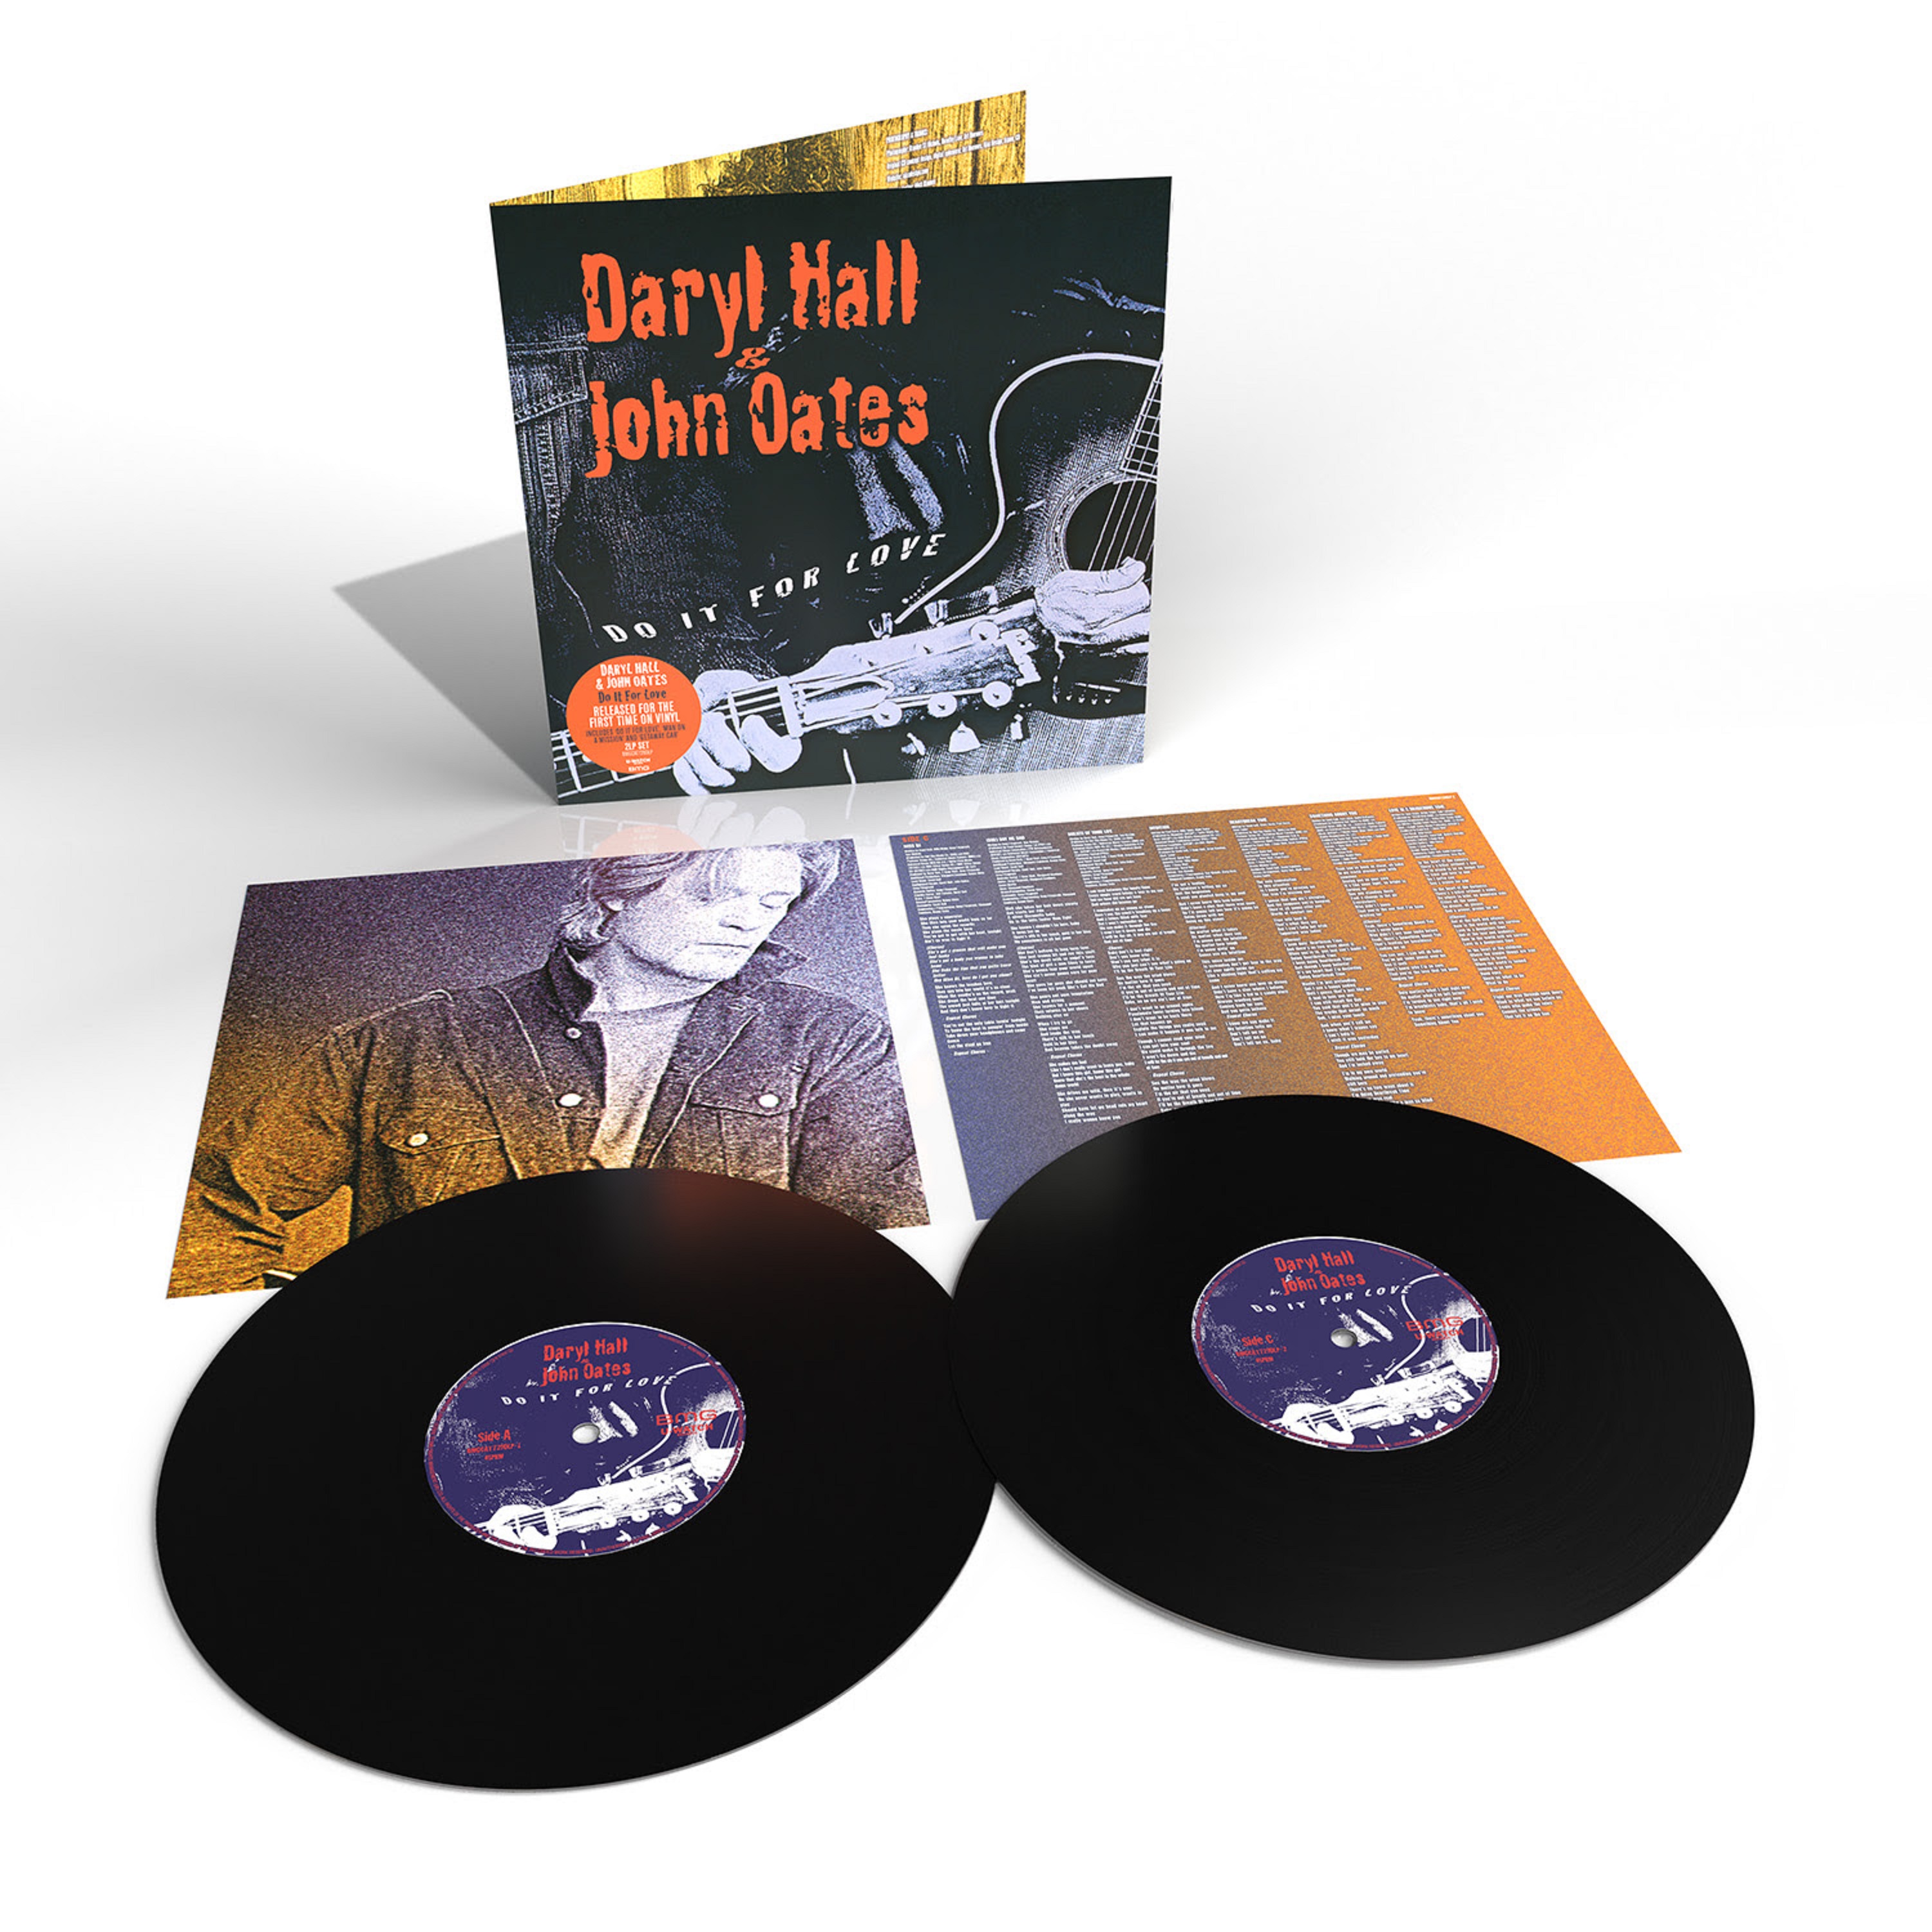 Out Now ~ Daryl Hall & John Oates ~ 'Do It For Love' Reissued on Vinyl for the First Time